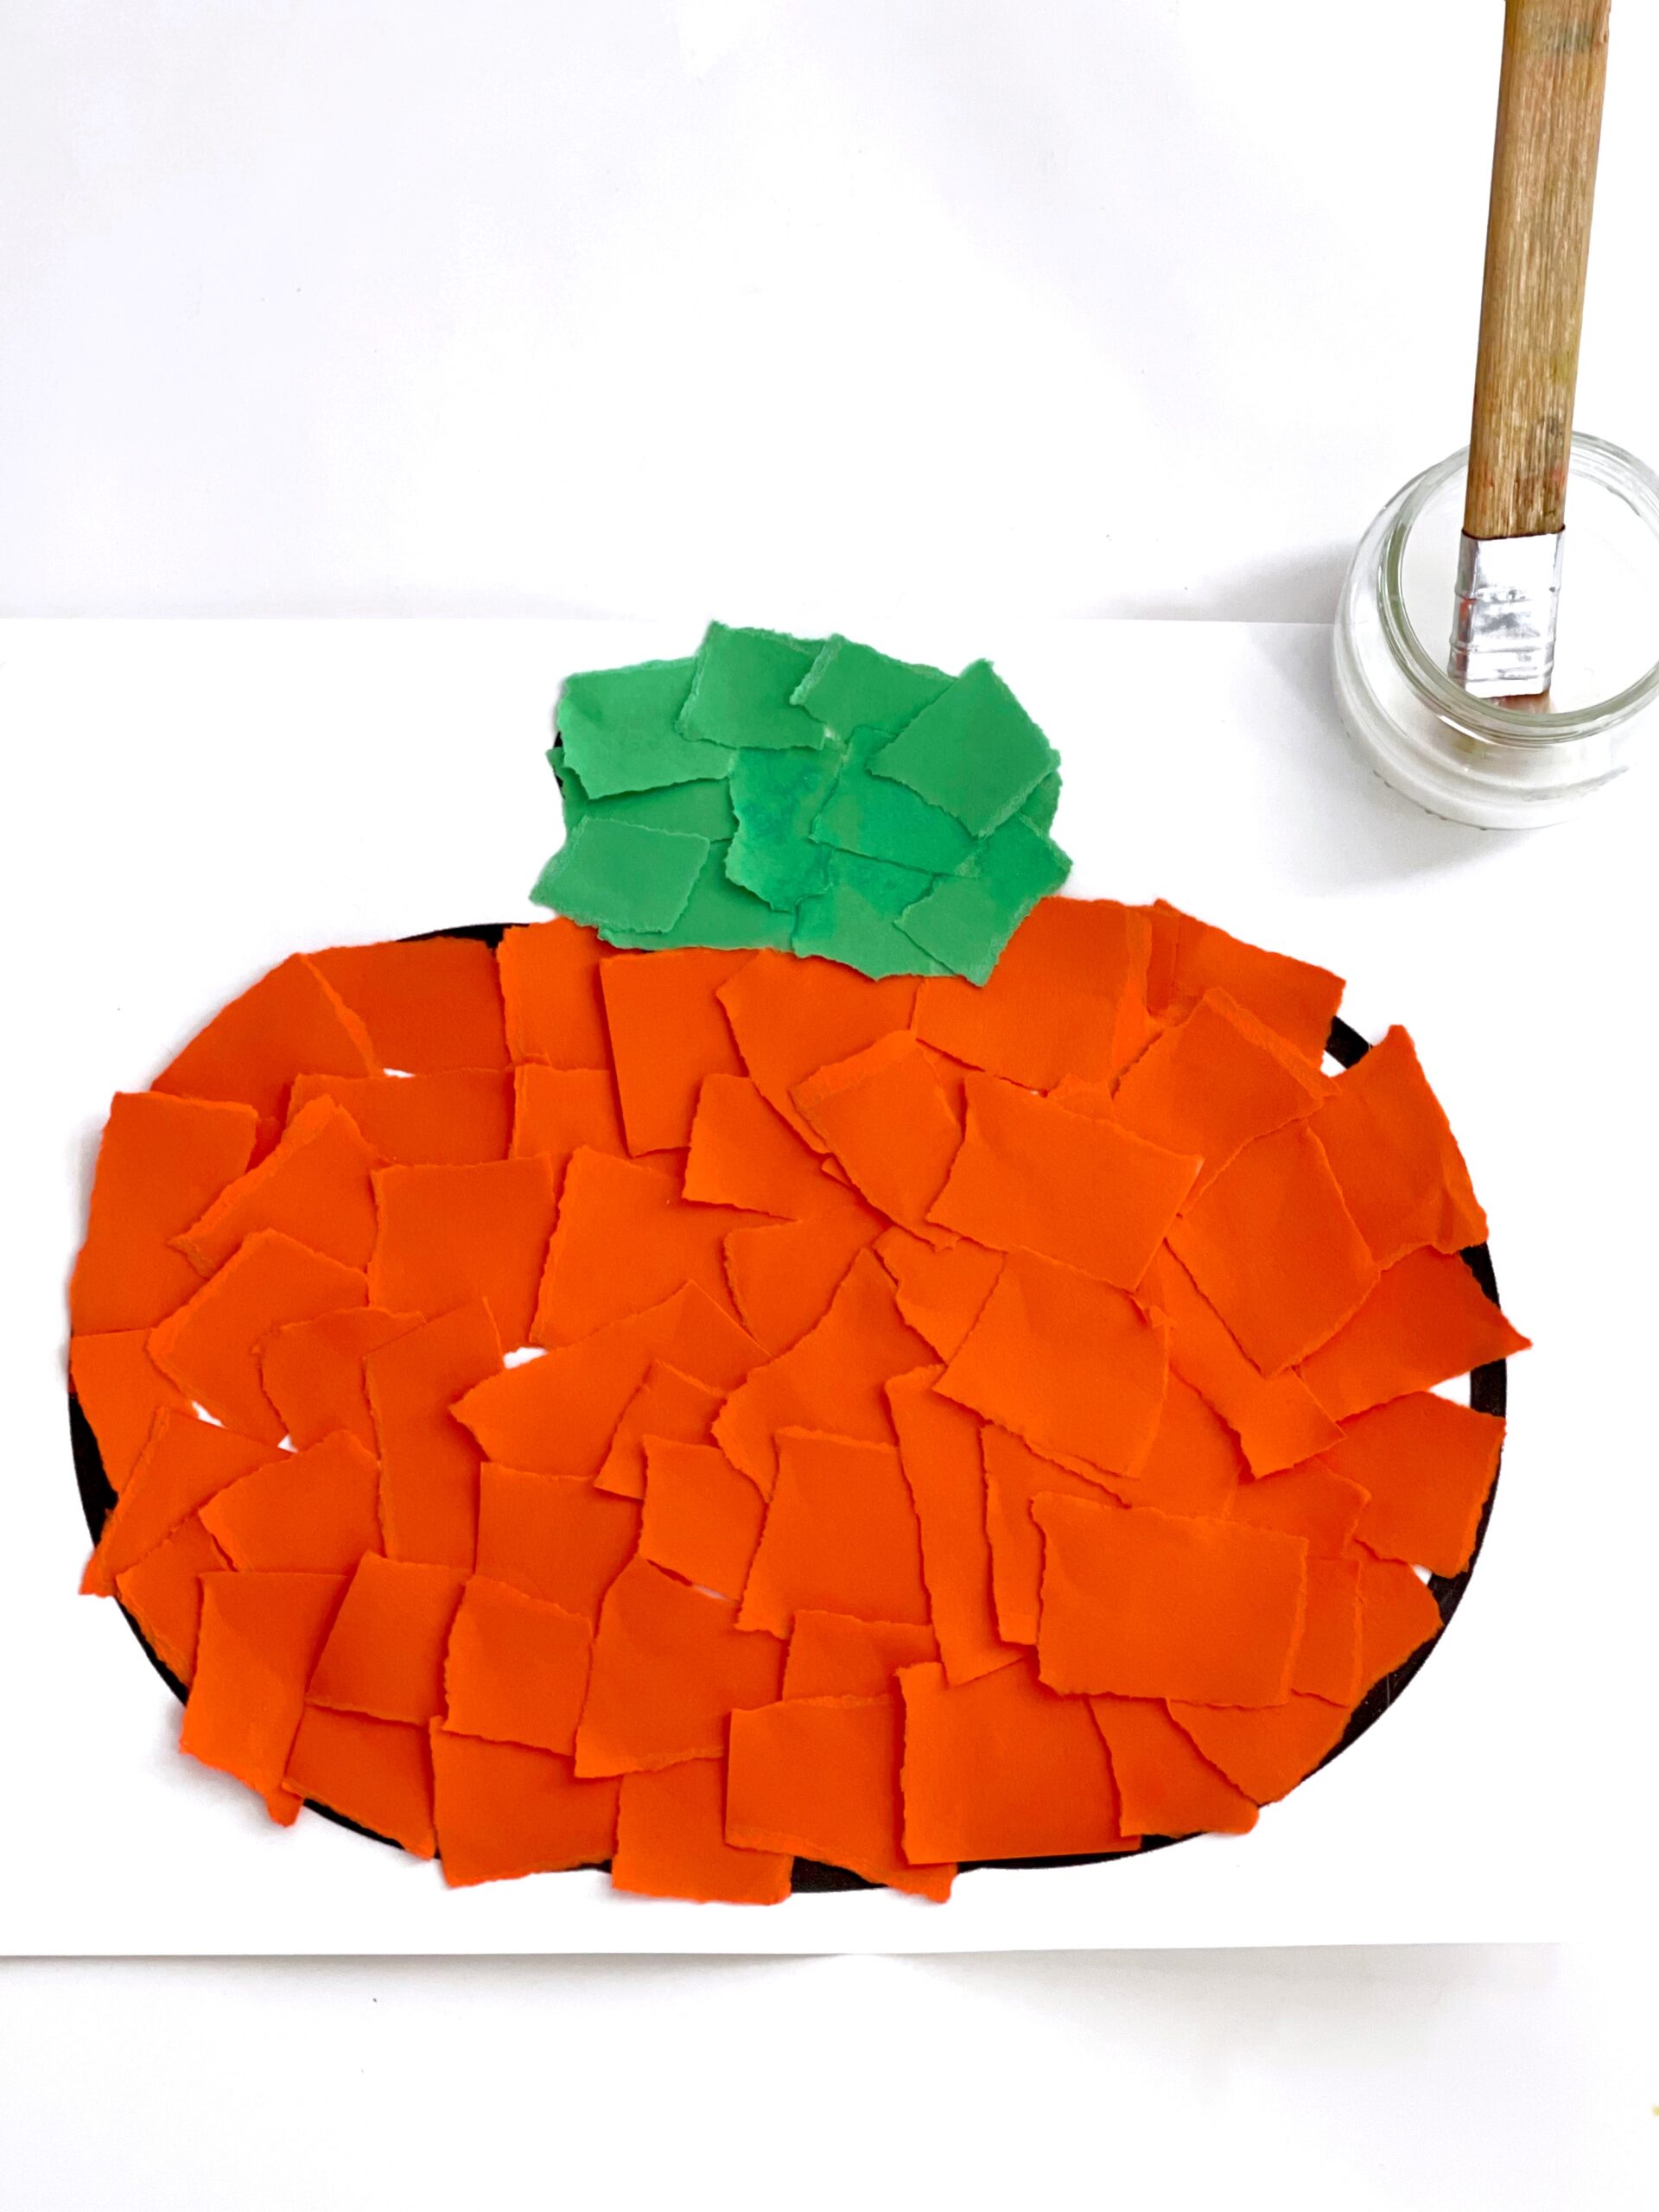 How to make torn paper art projects for preschoolers? - DIY ART PINS